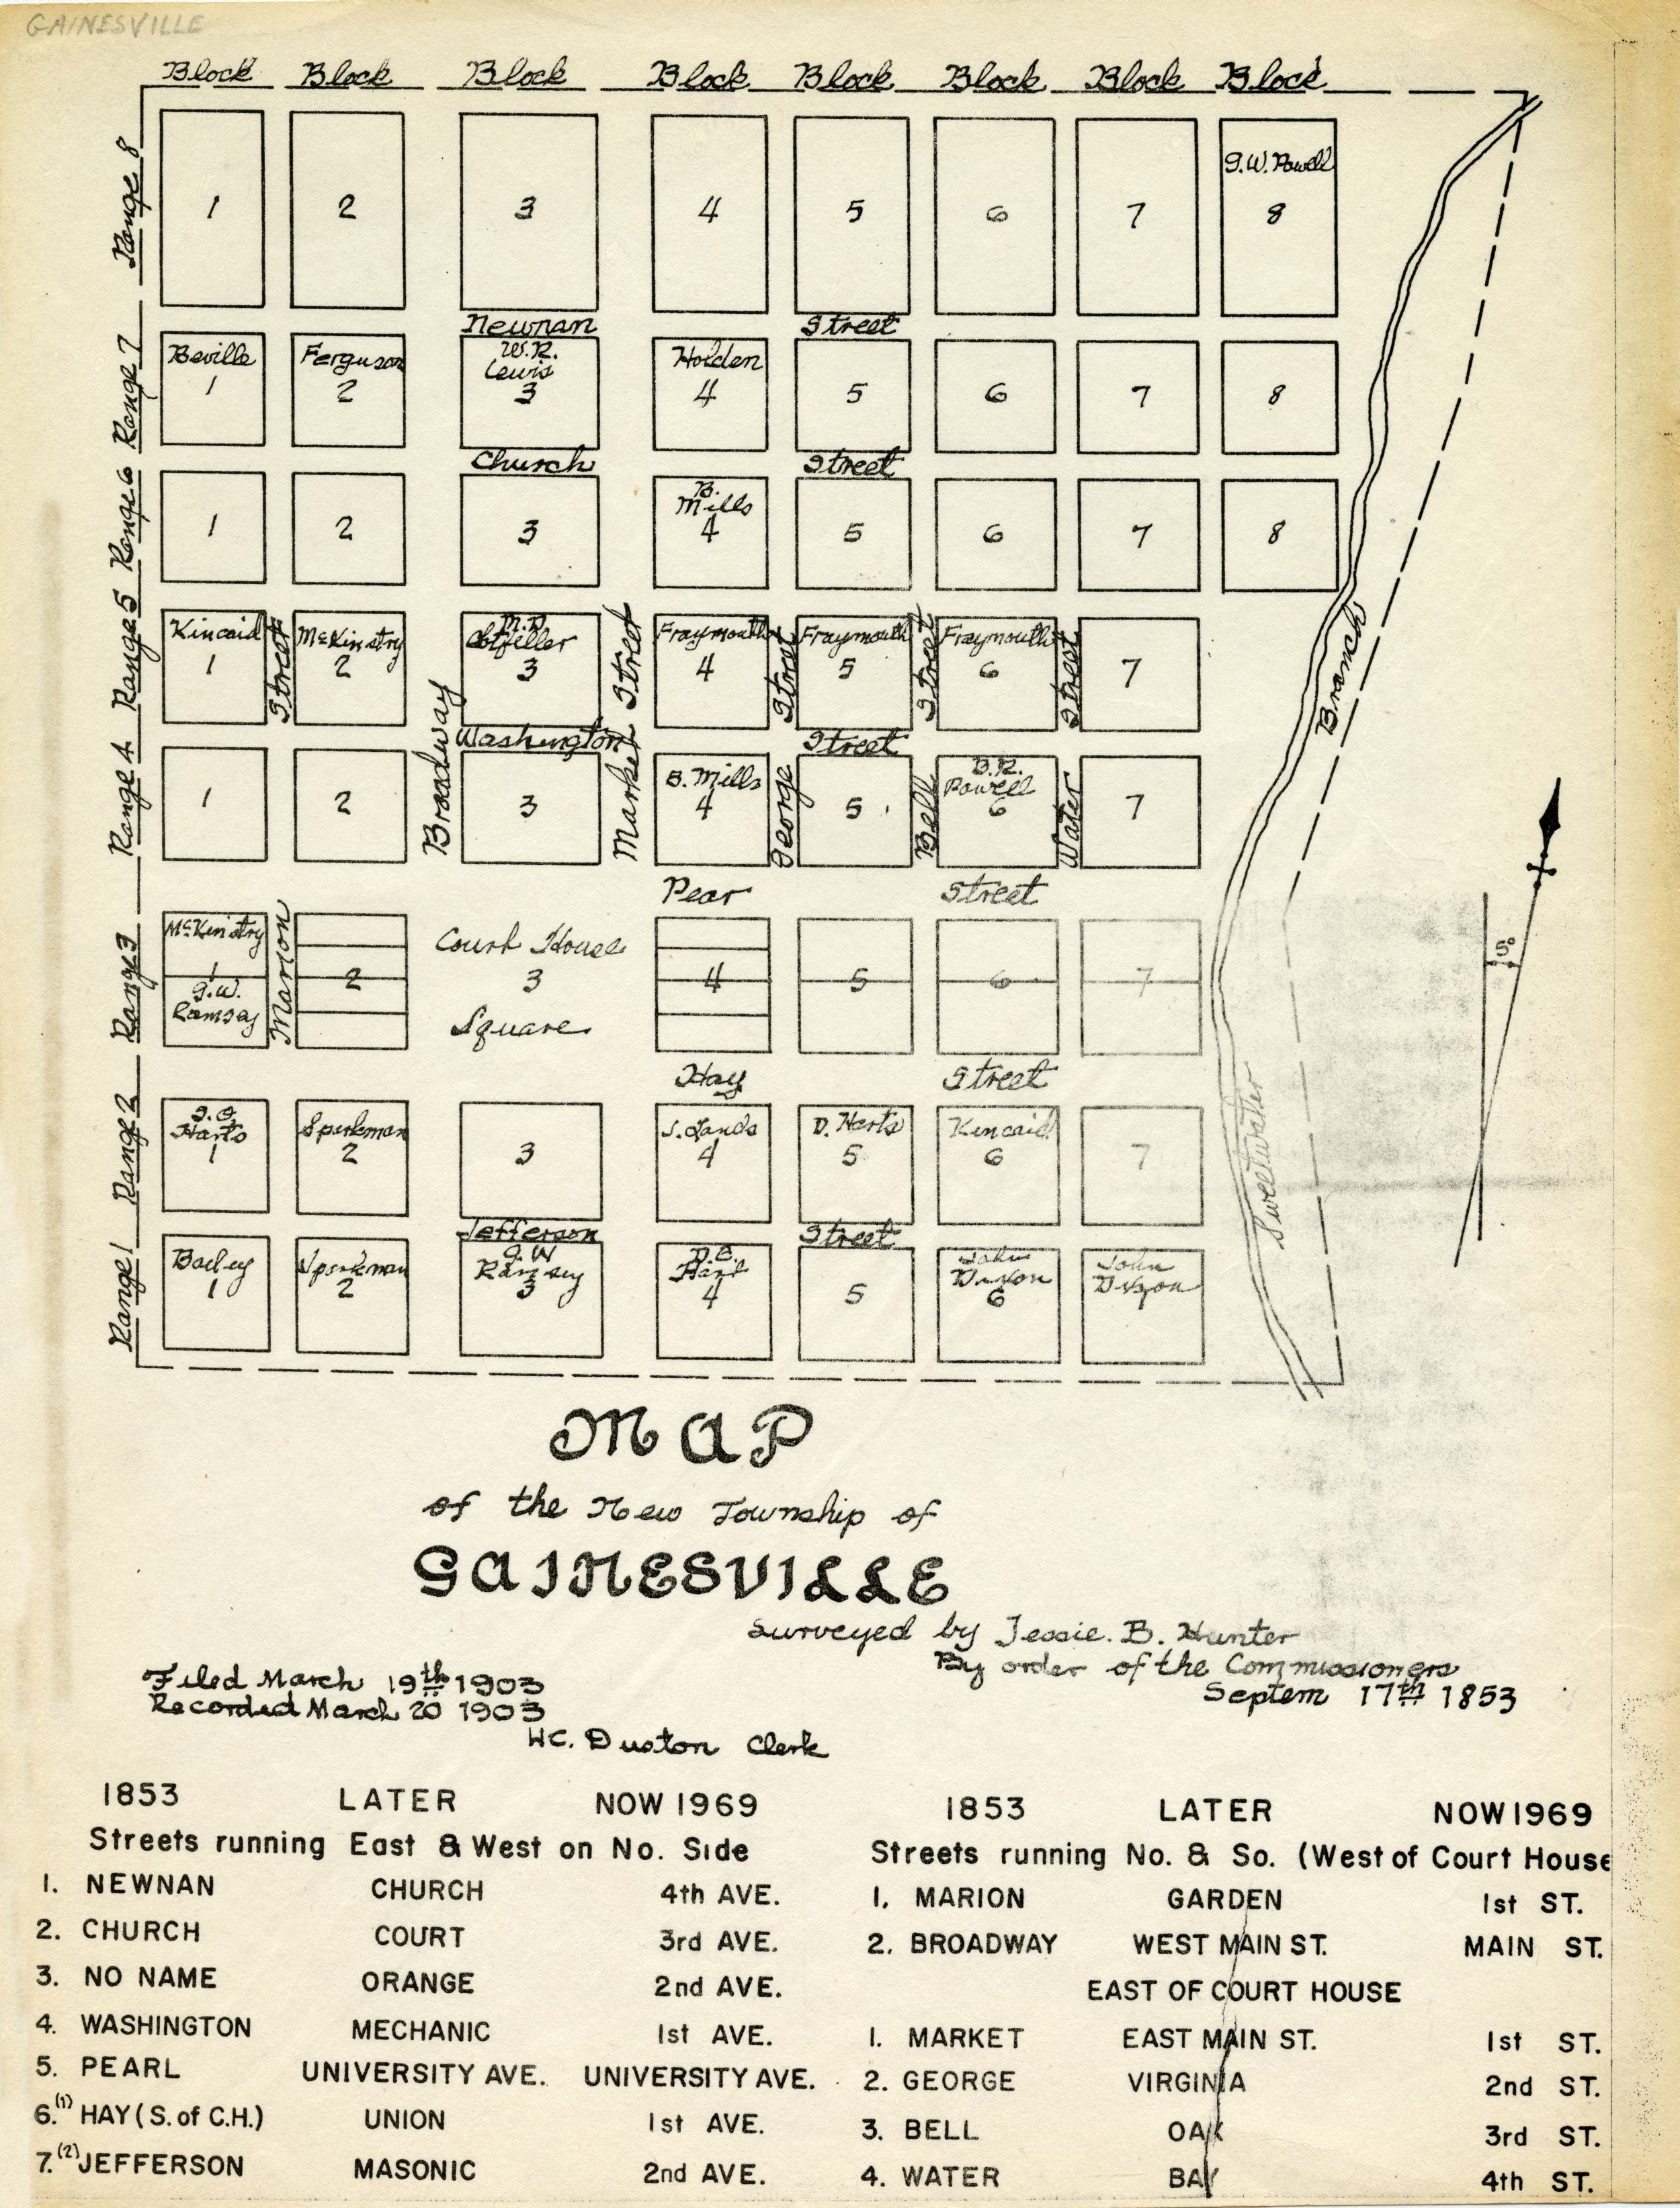 Map of Gainesville, 1853